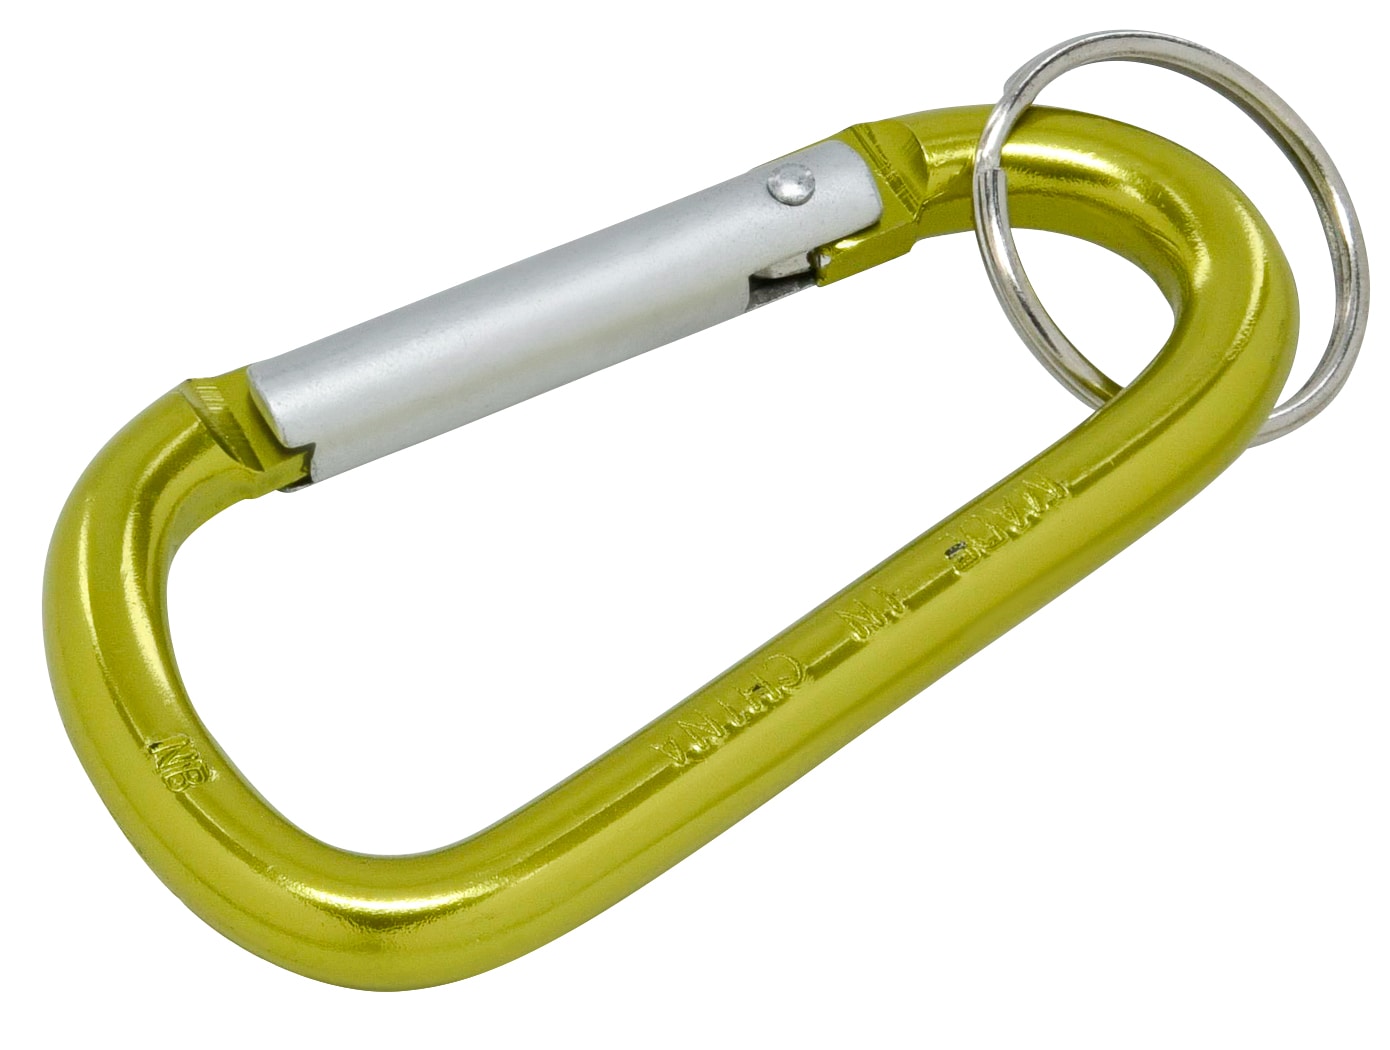 Wholesale 4 inch carabiner For Hardware And Tools Needs –